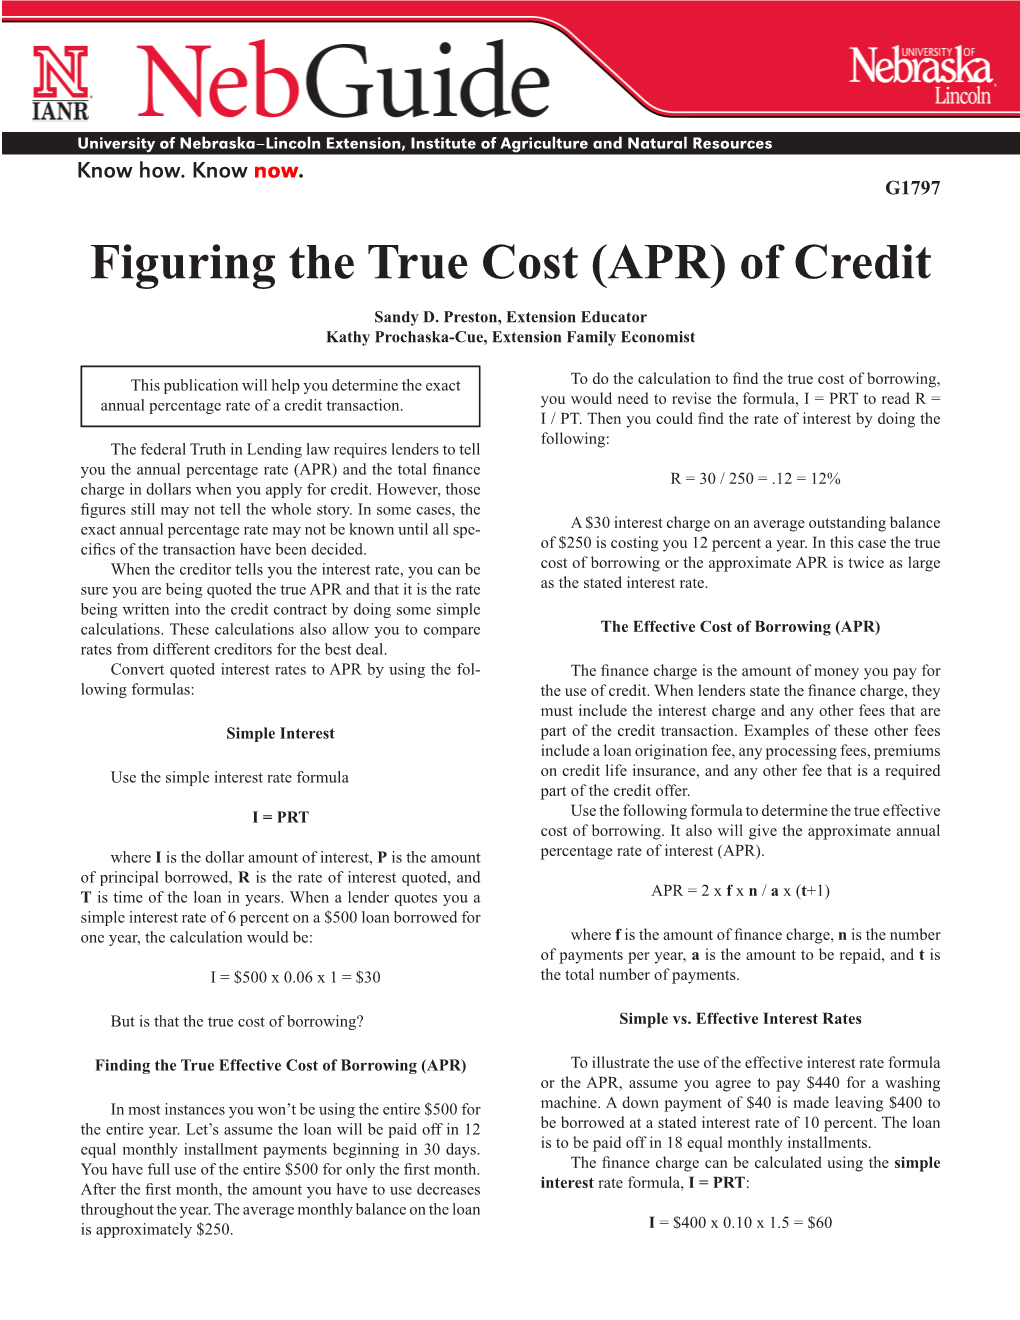 Figuring the True Cost (APR) of Credit